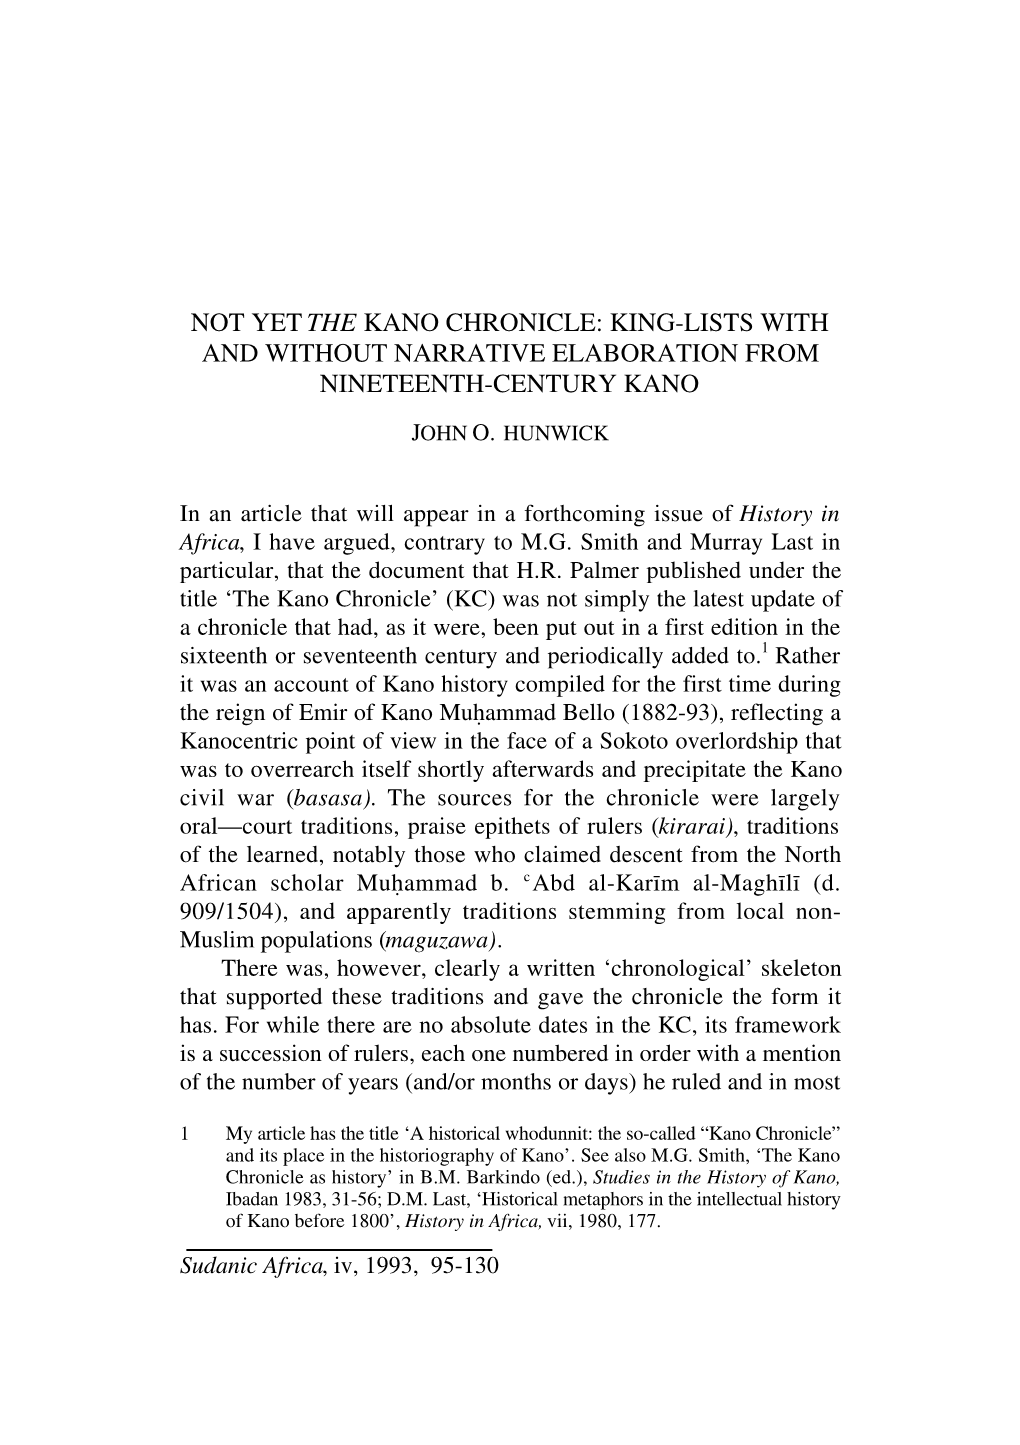 Not Yet the Kano Chronicle: King-Lists with and Without Narrative Elaboration from Nineteenth-Century Kano